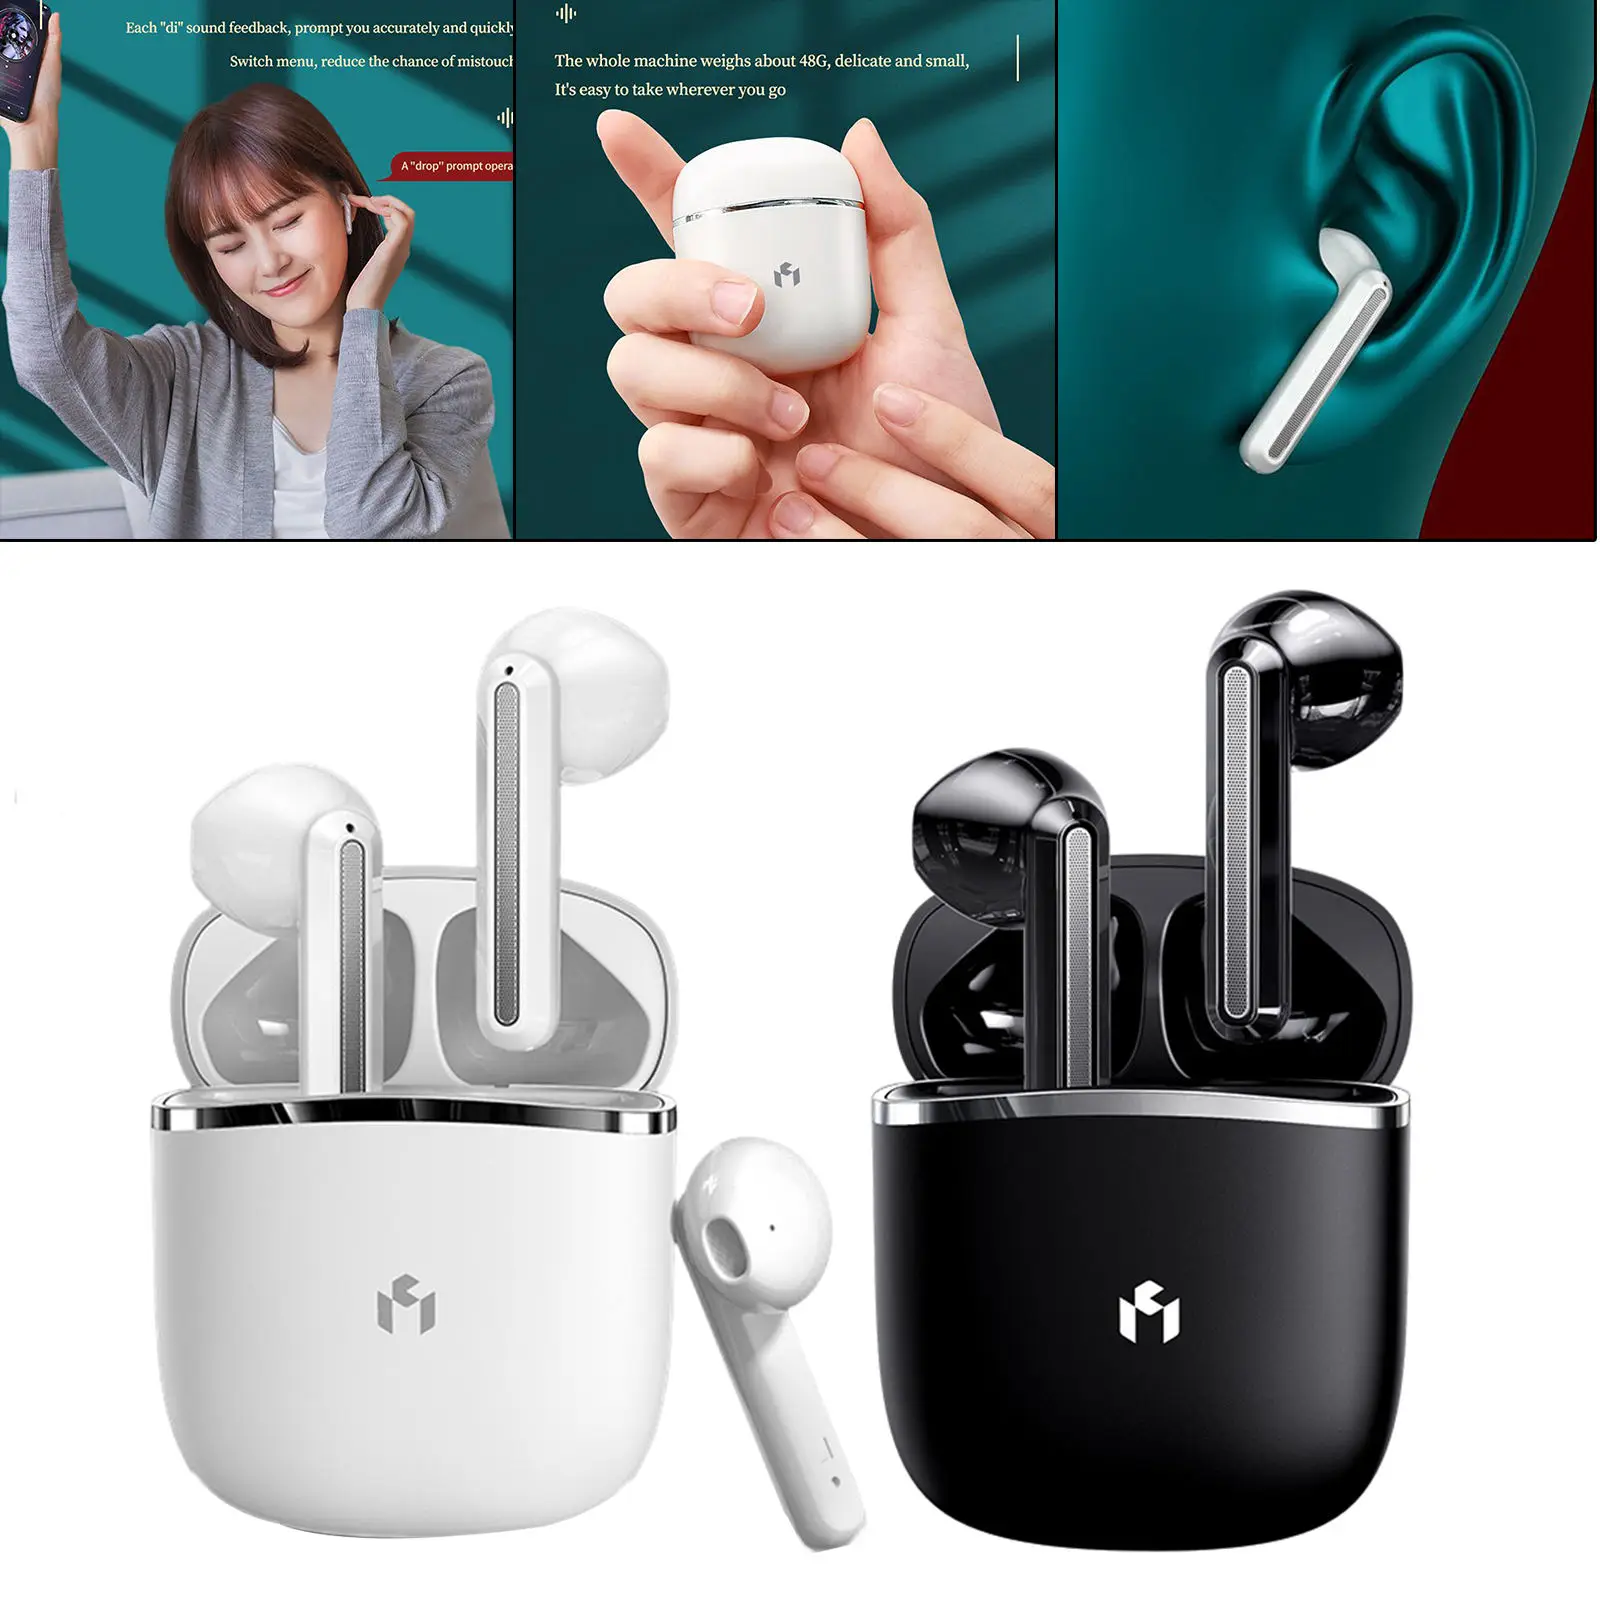 Bluetooth Earbuds Noise Canceling Stable Large Size Diaphragm 360° Surround Sound HiFi Sound Bluetooth 5.0 Headphones for Work